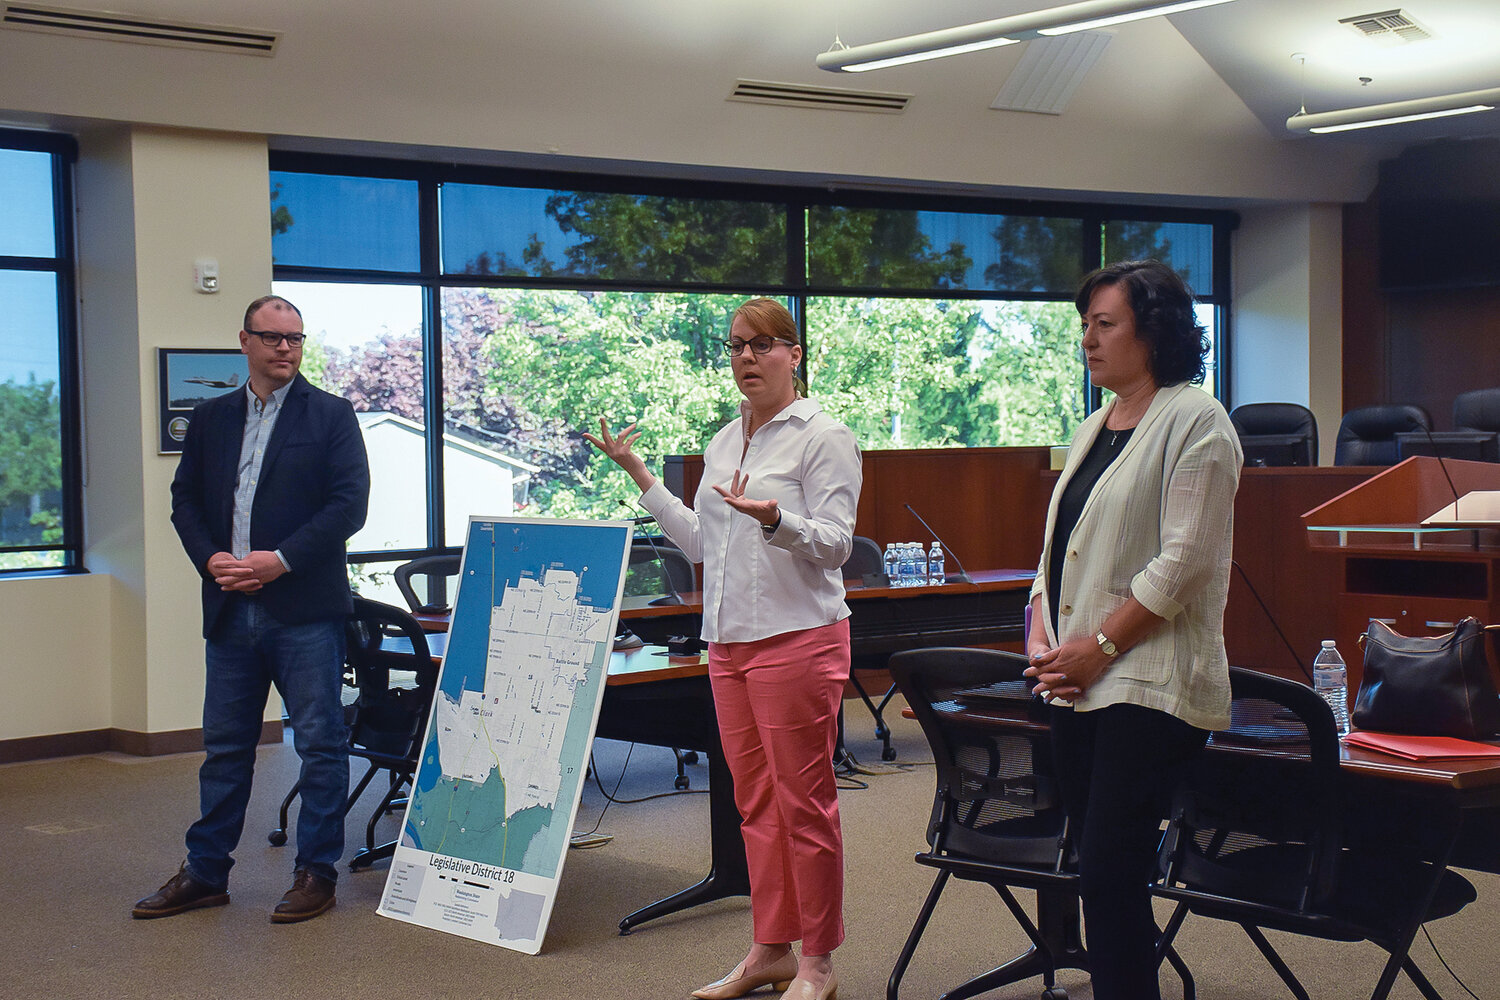 Republican Washington state Sen. Ann Rivers, center, speaks to constituents gathered at Battle Ground City Hall on May 13 for a town hall meeting. State Reps. Greg Cheney, left, and Stephanie McClintock, also took questions at the event.